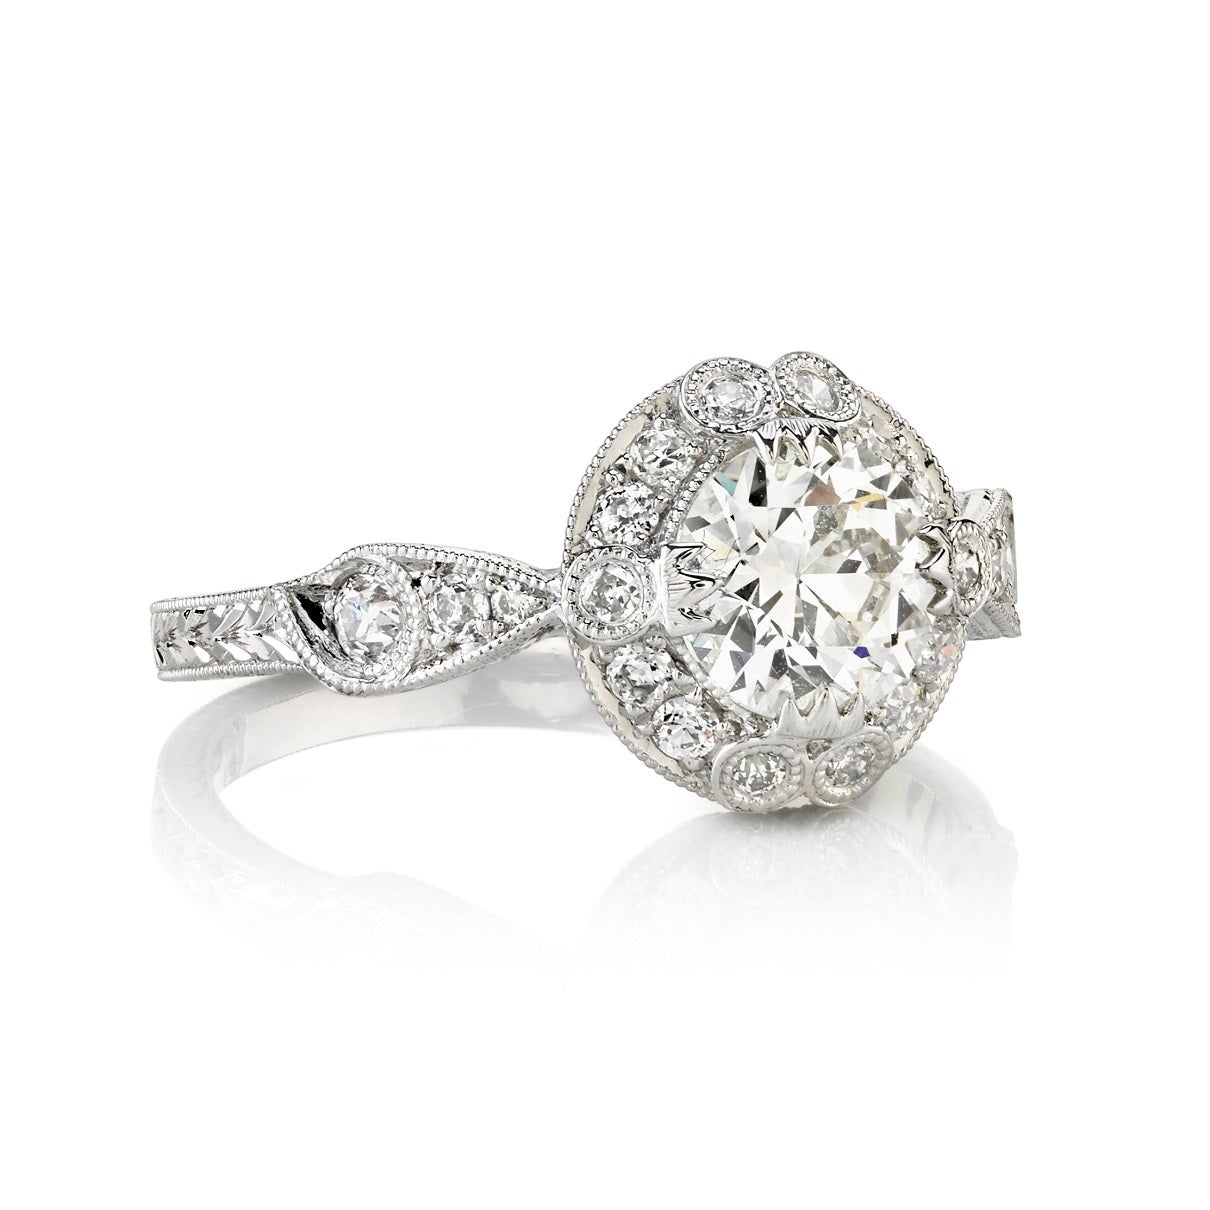 0.90ct G/VS1 EGL certified old European cut diamond set in a handcrafted platinum mounting. A classic Edwardian design that features a feminine halo, hand engraving and filigree.